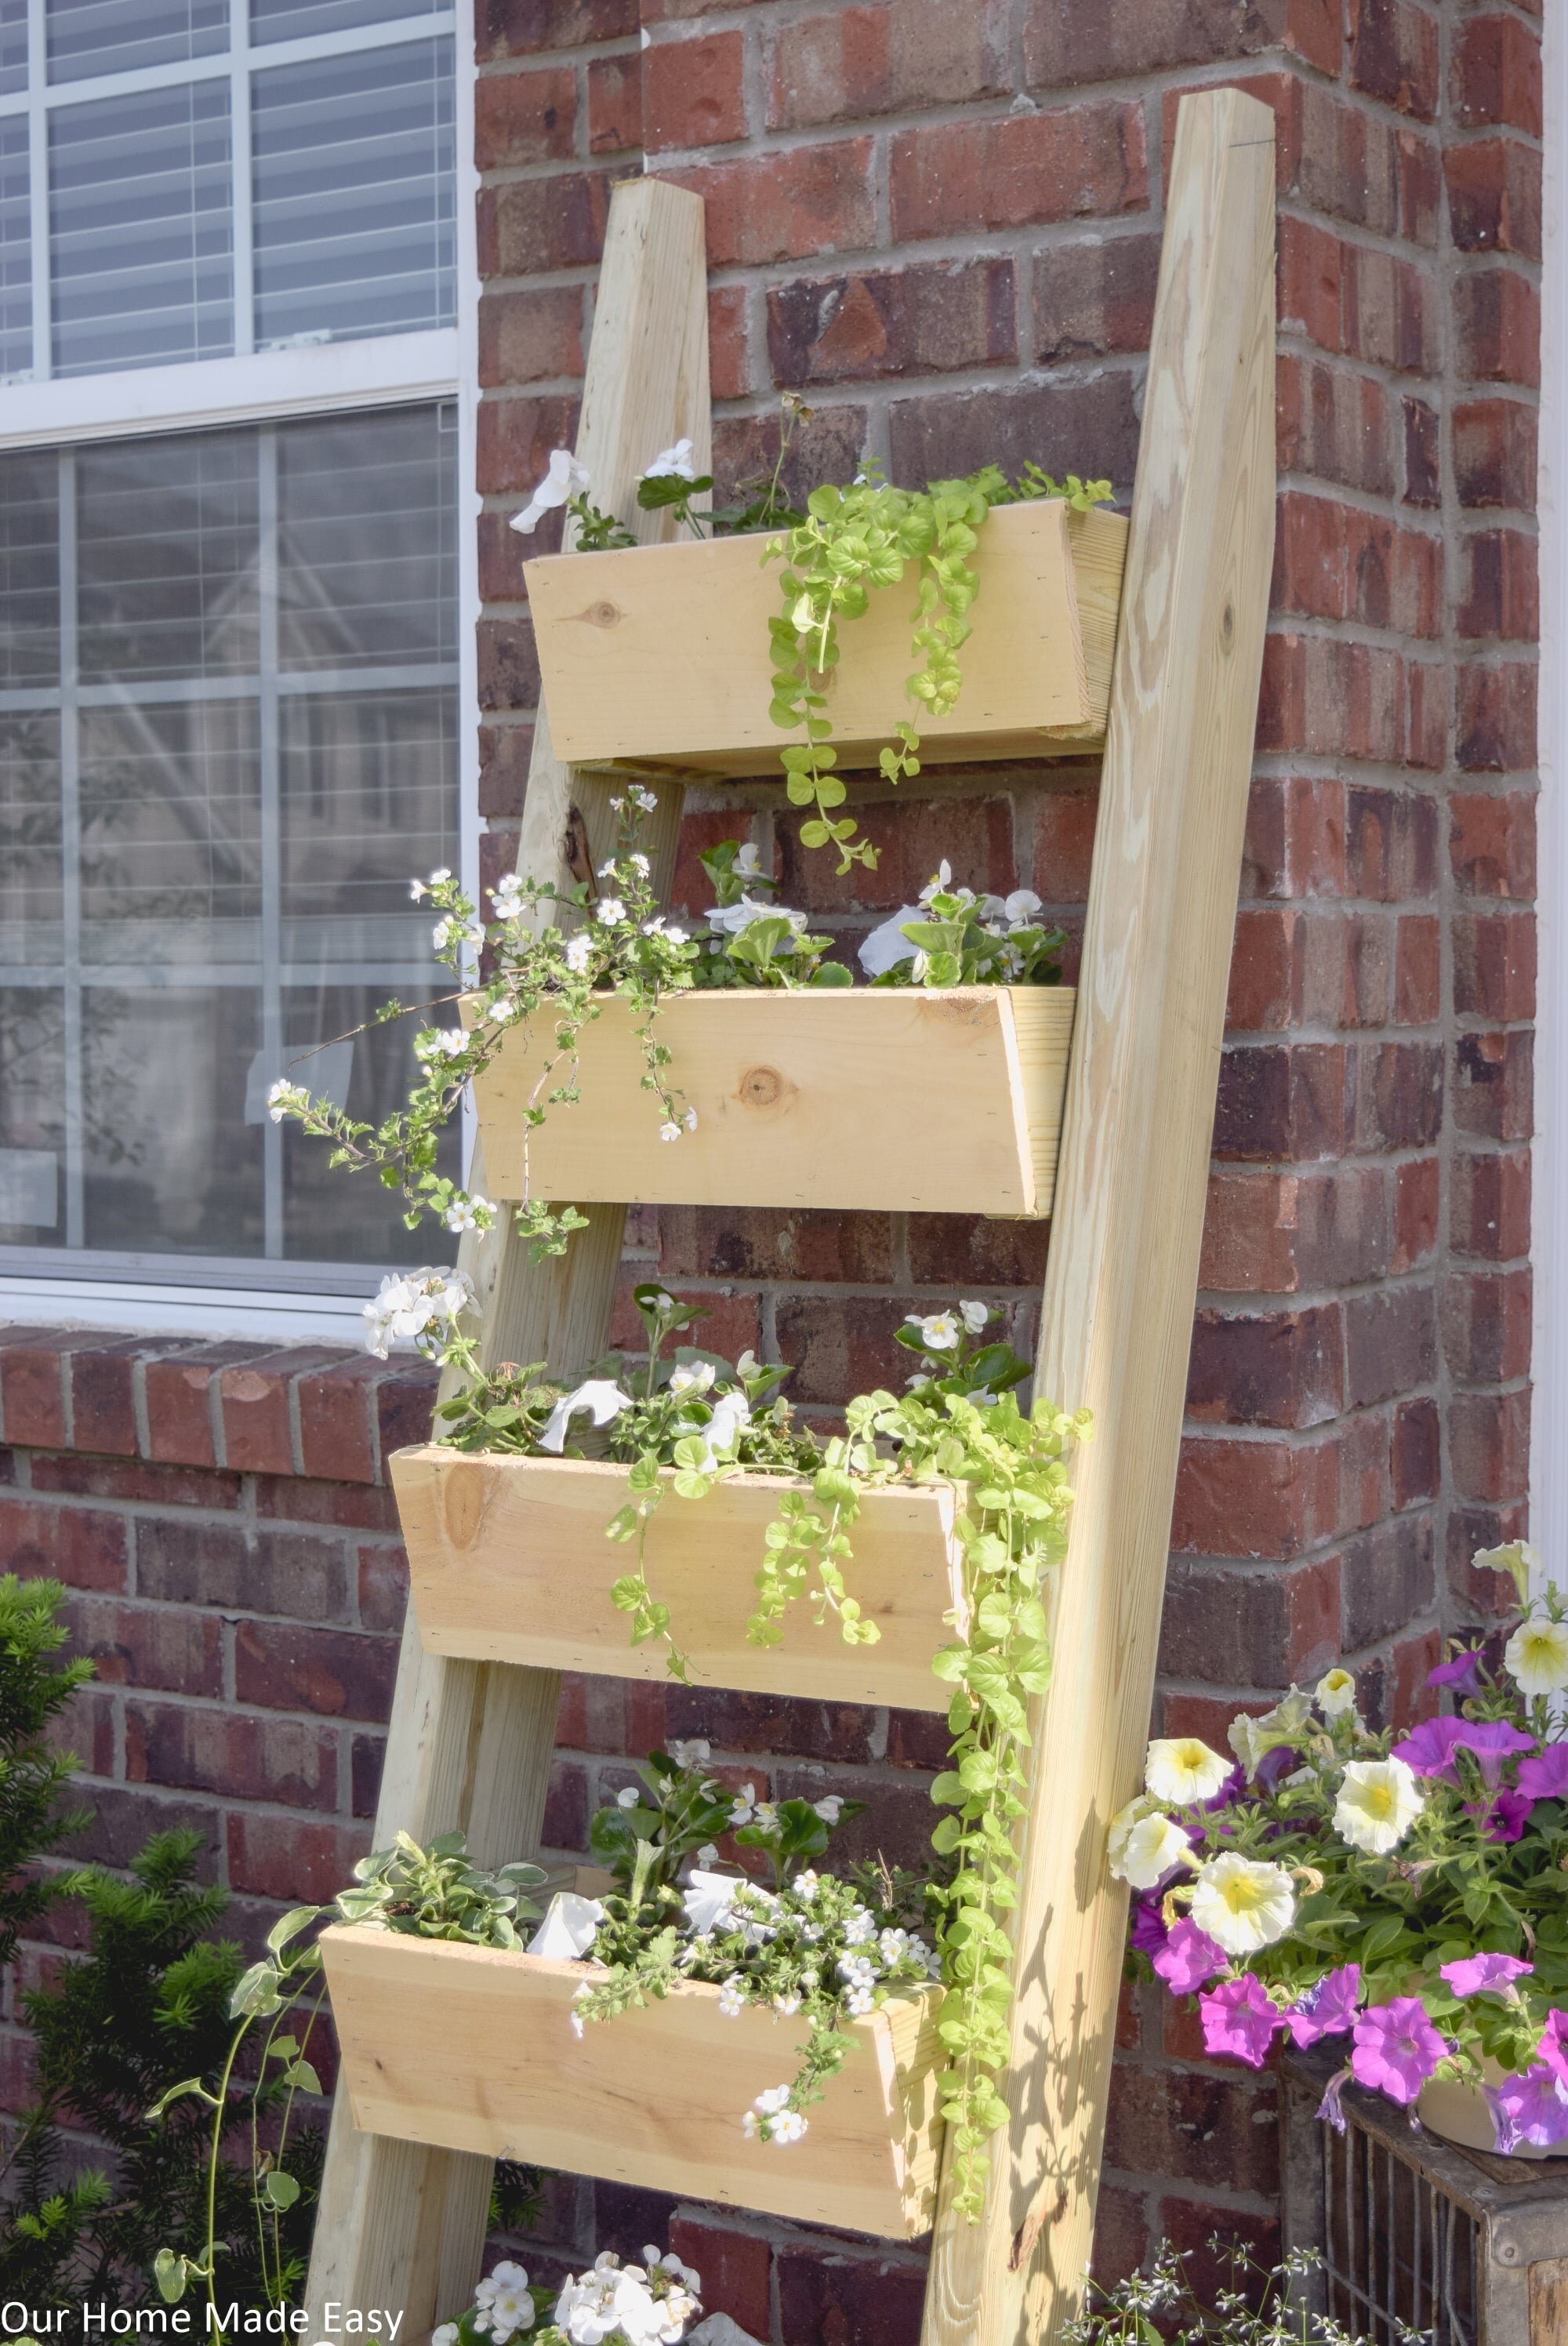 This DIY cedar ladder planter is the perfect addition to your garden or outdoor home decor!